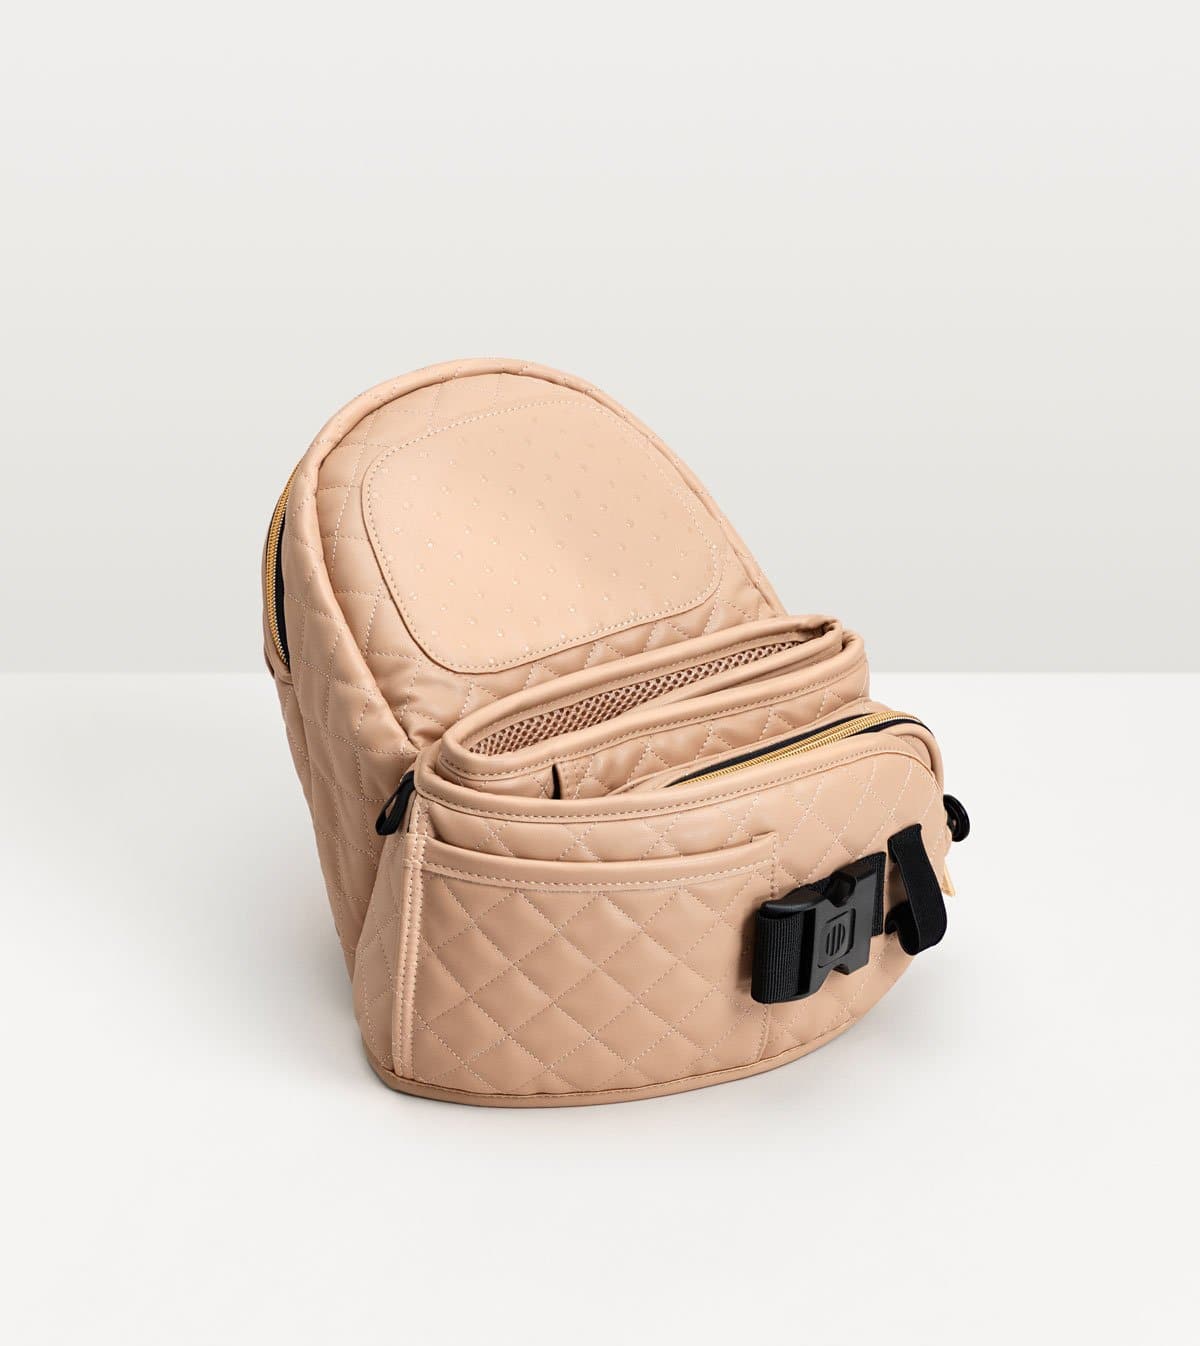 Tushbaby Hip Carrier - ANB Baby -850006525188$75 - $100